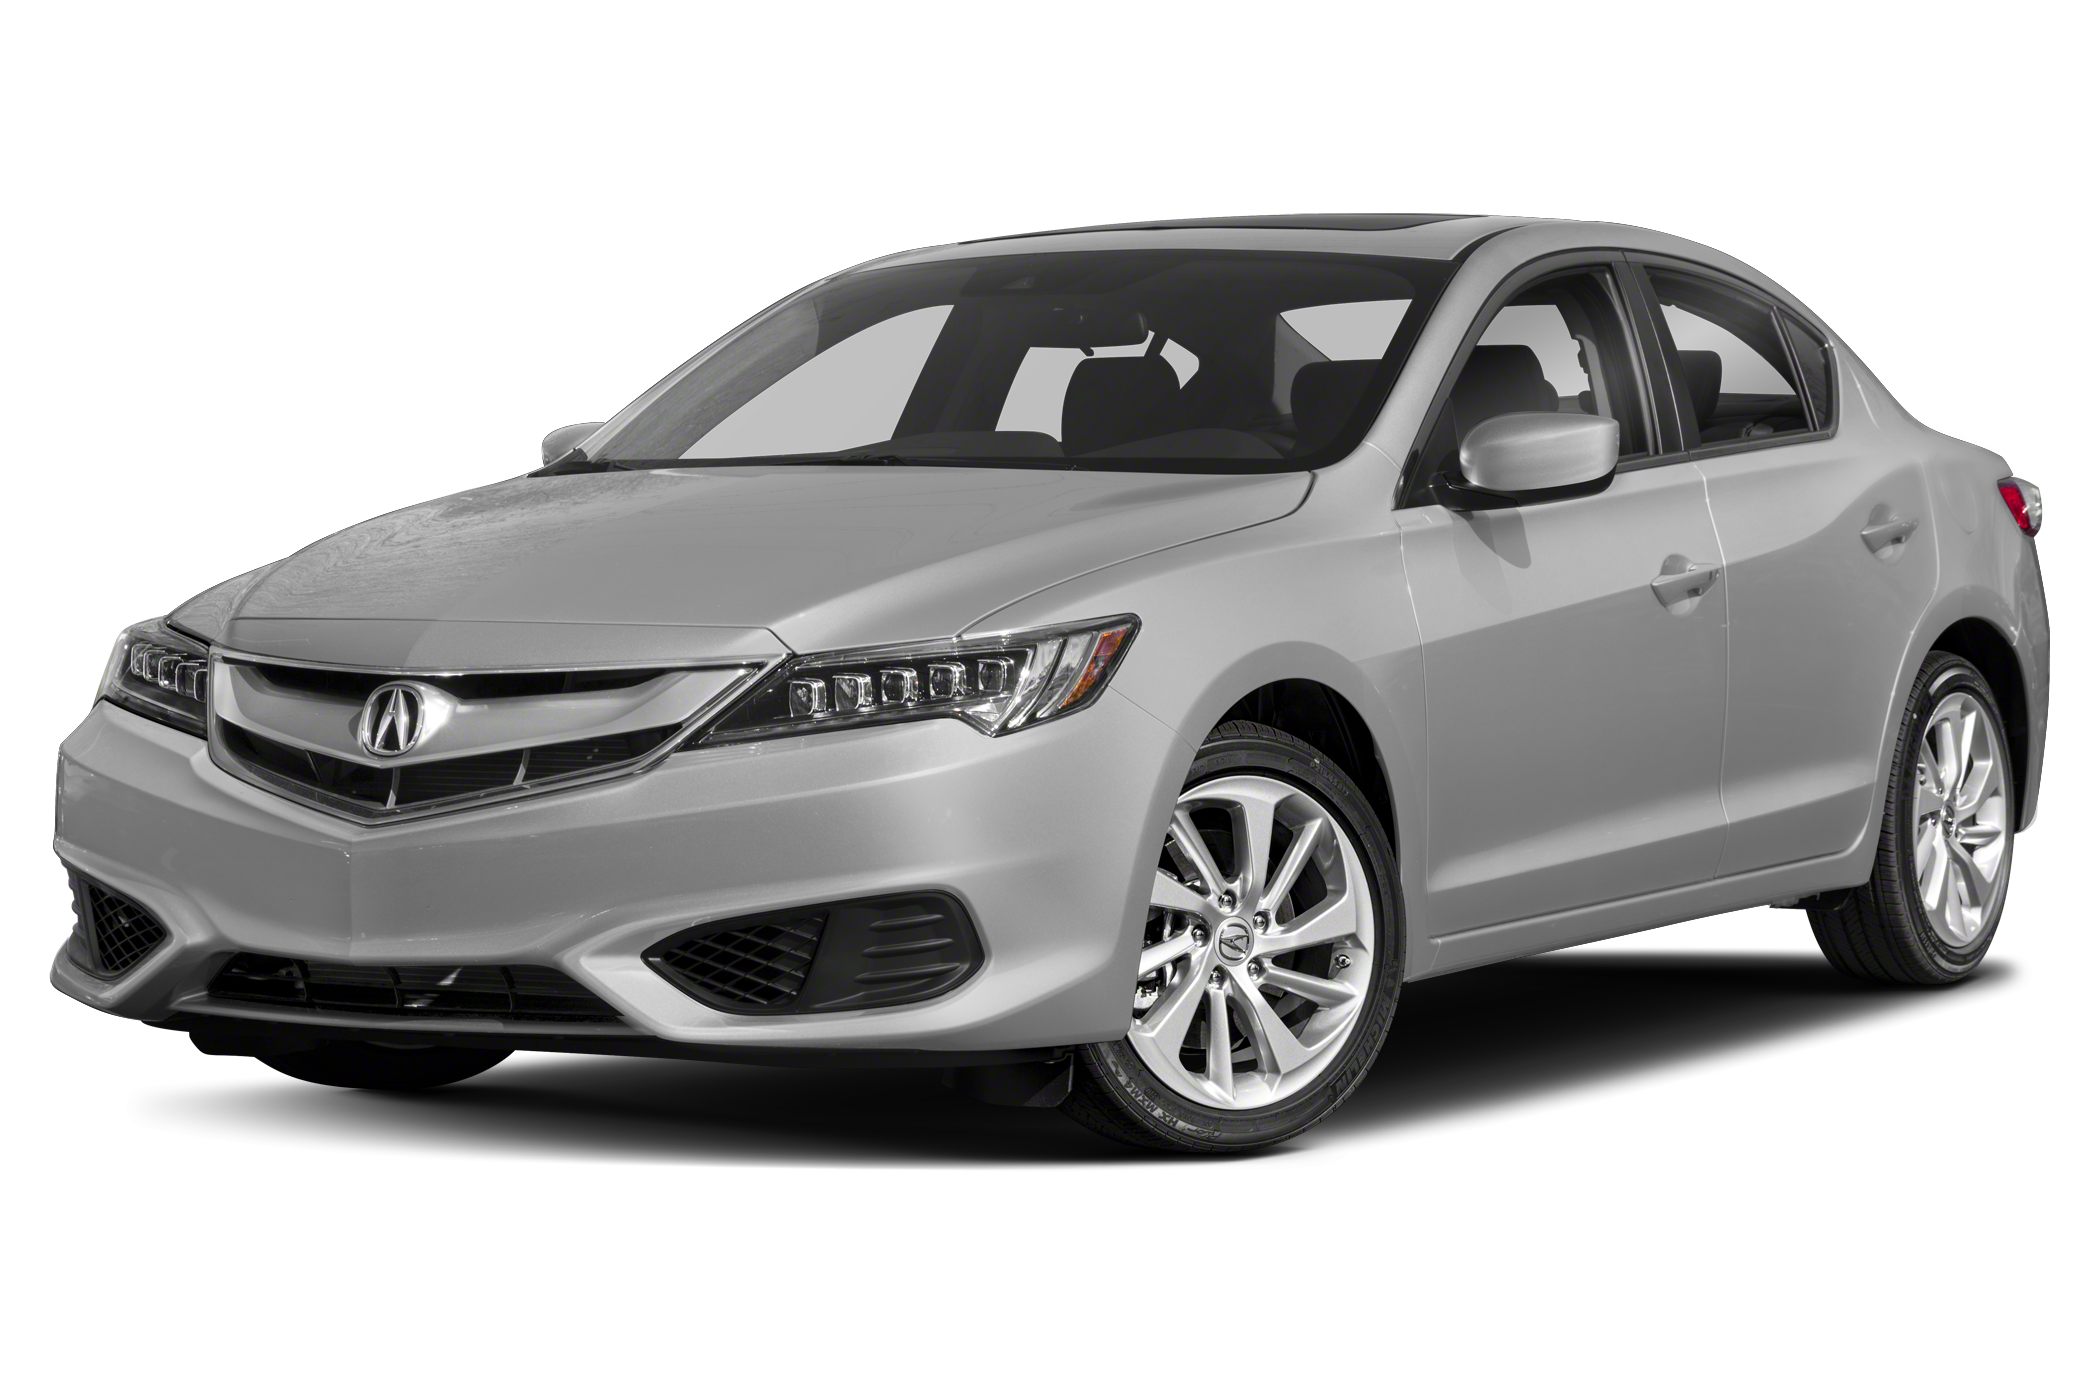 2018 Acura Ilx Acurawatch Plus Package 4dr Sedan Pictures